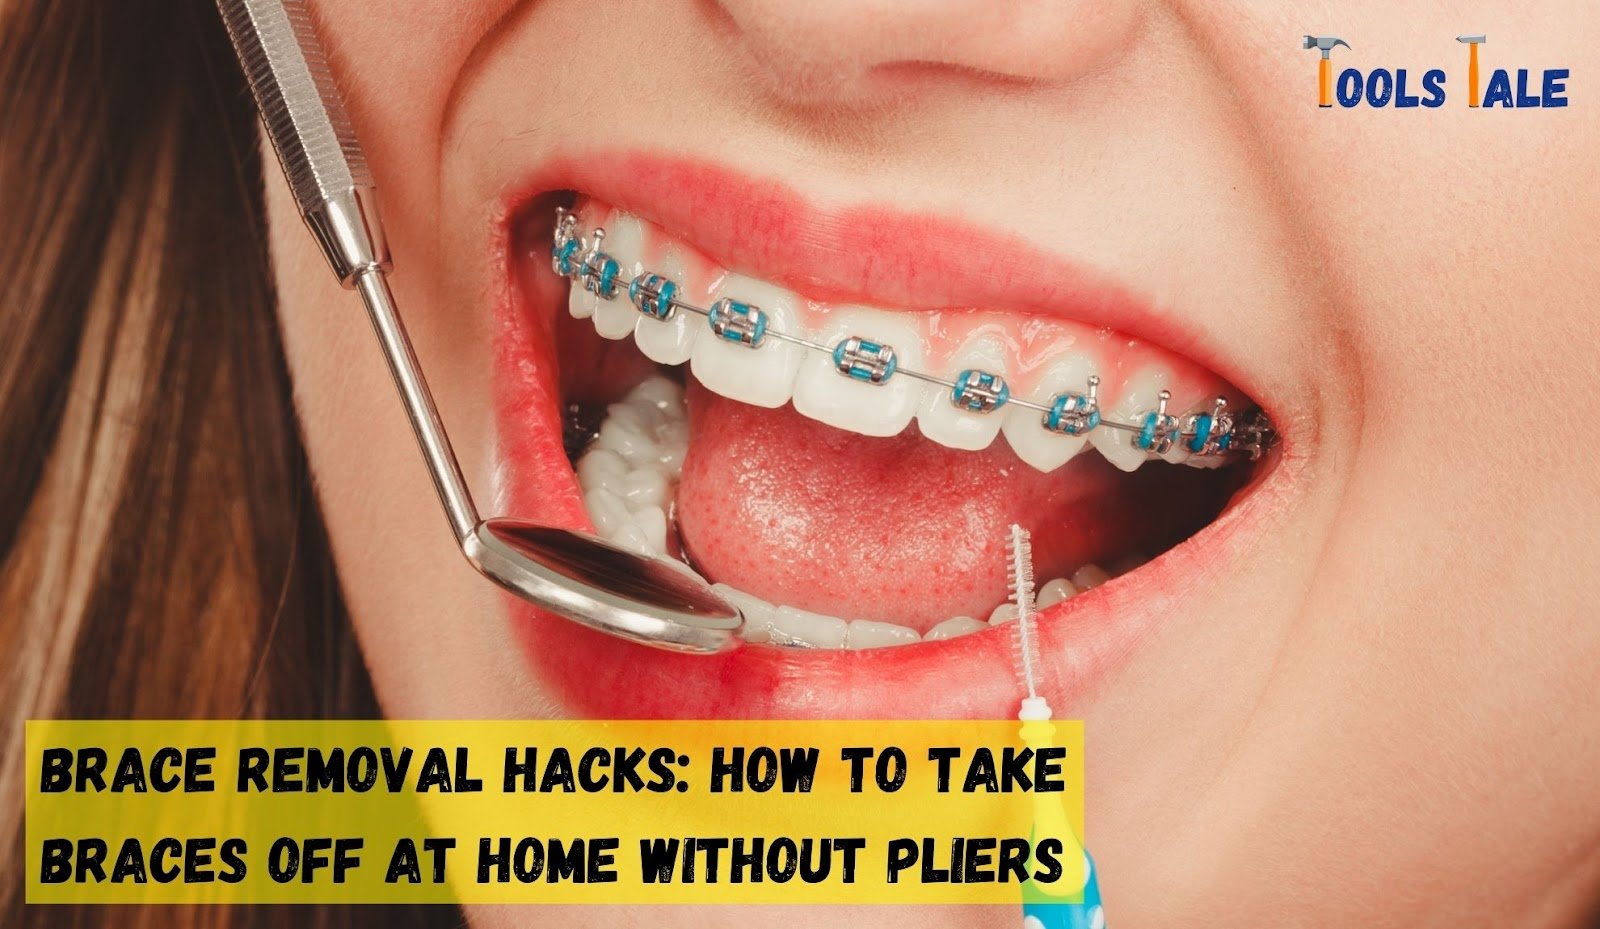 How to take braces off at home without pliers